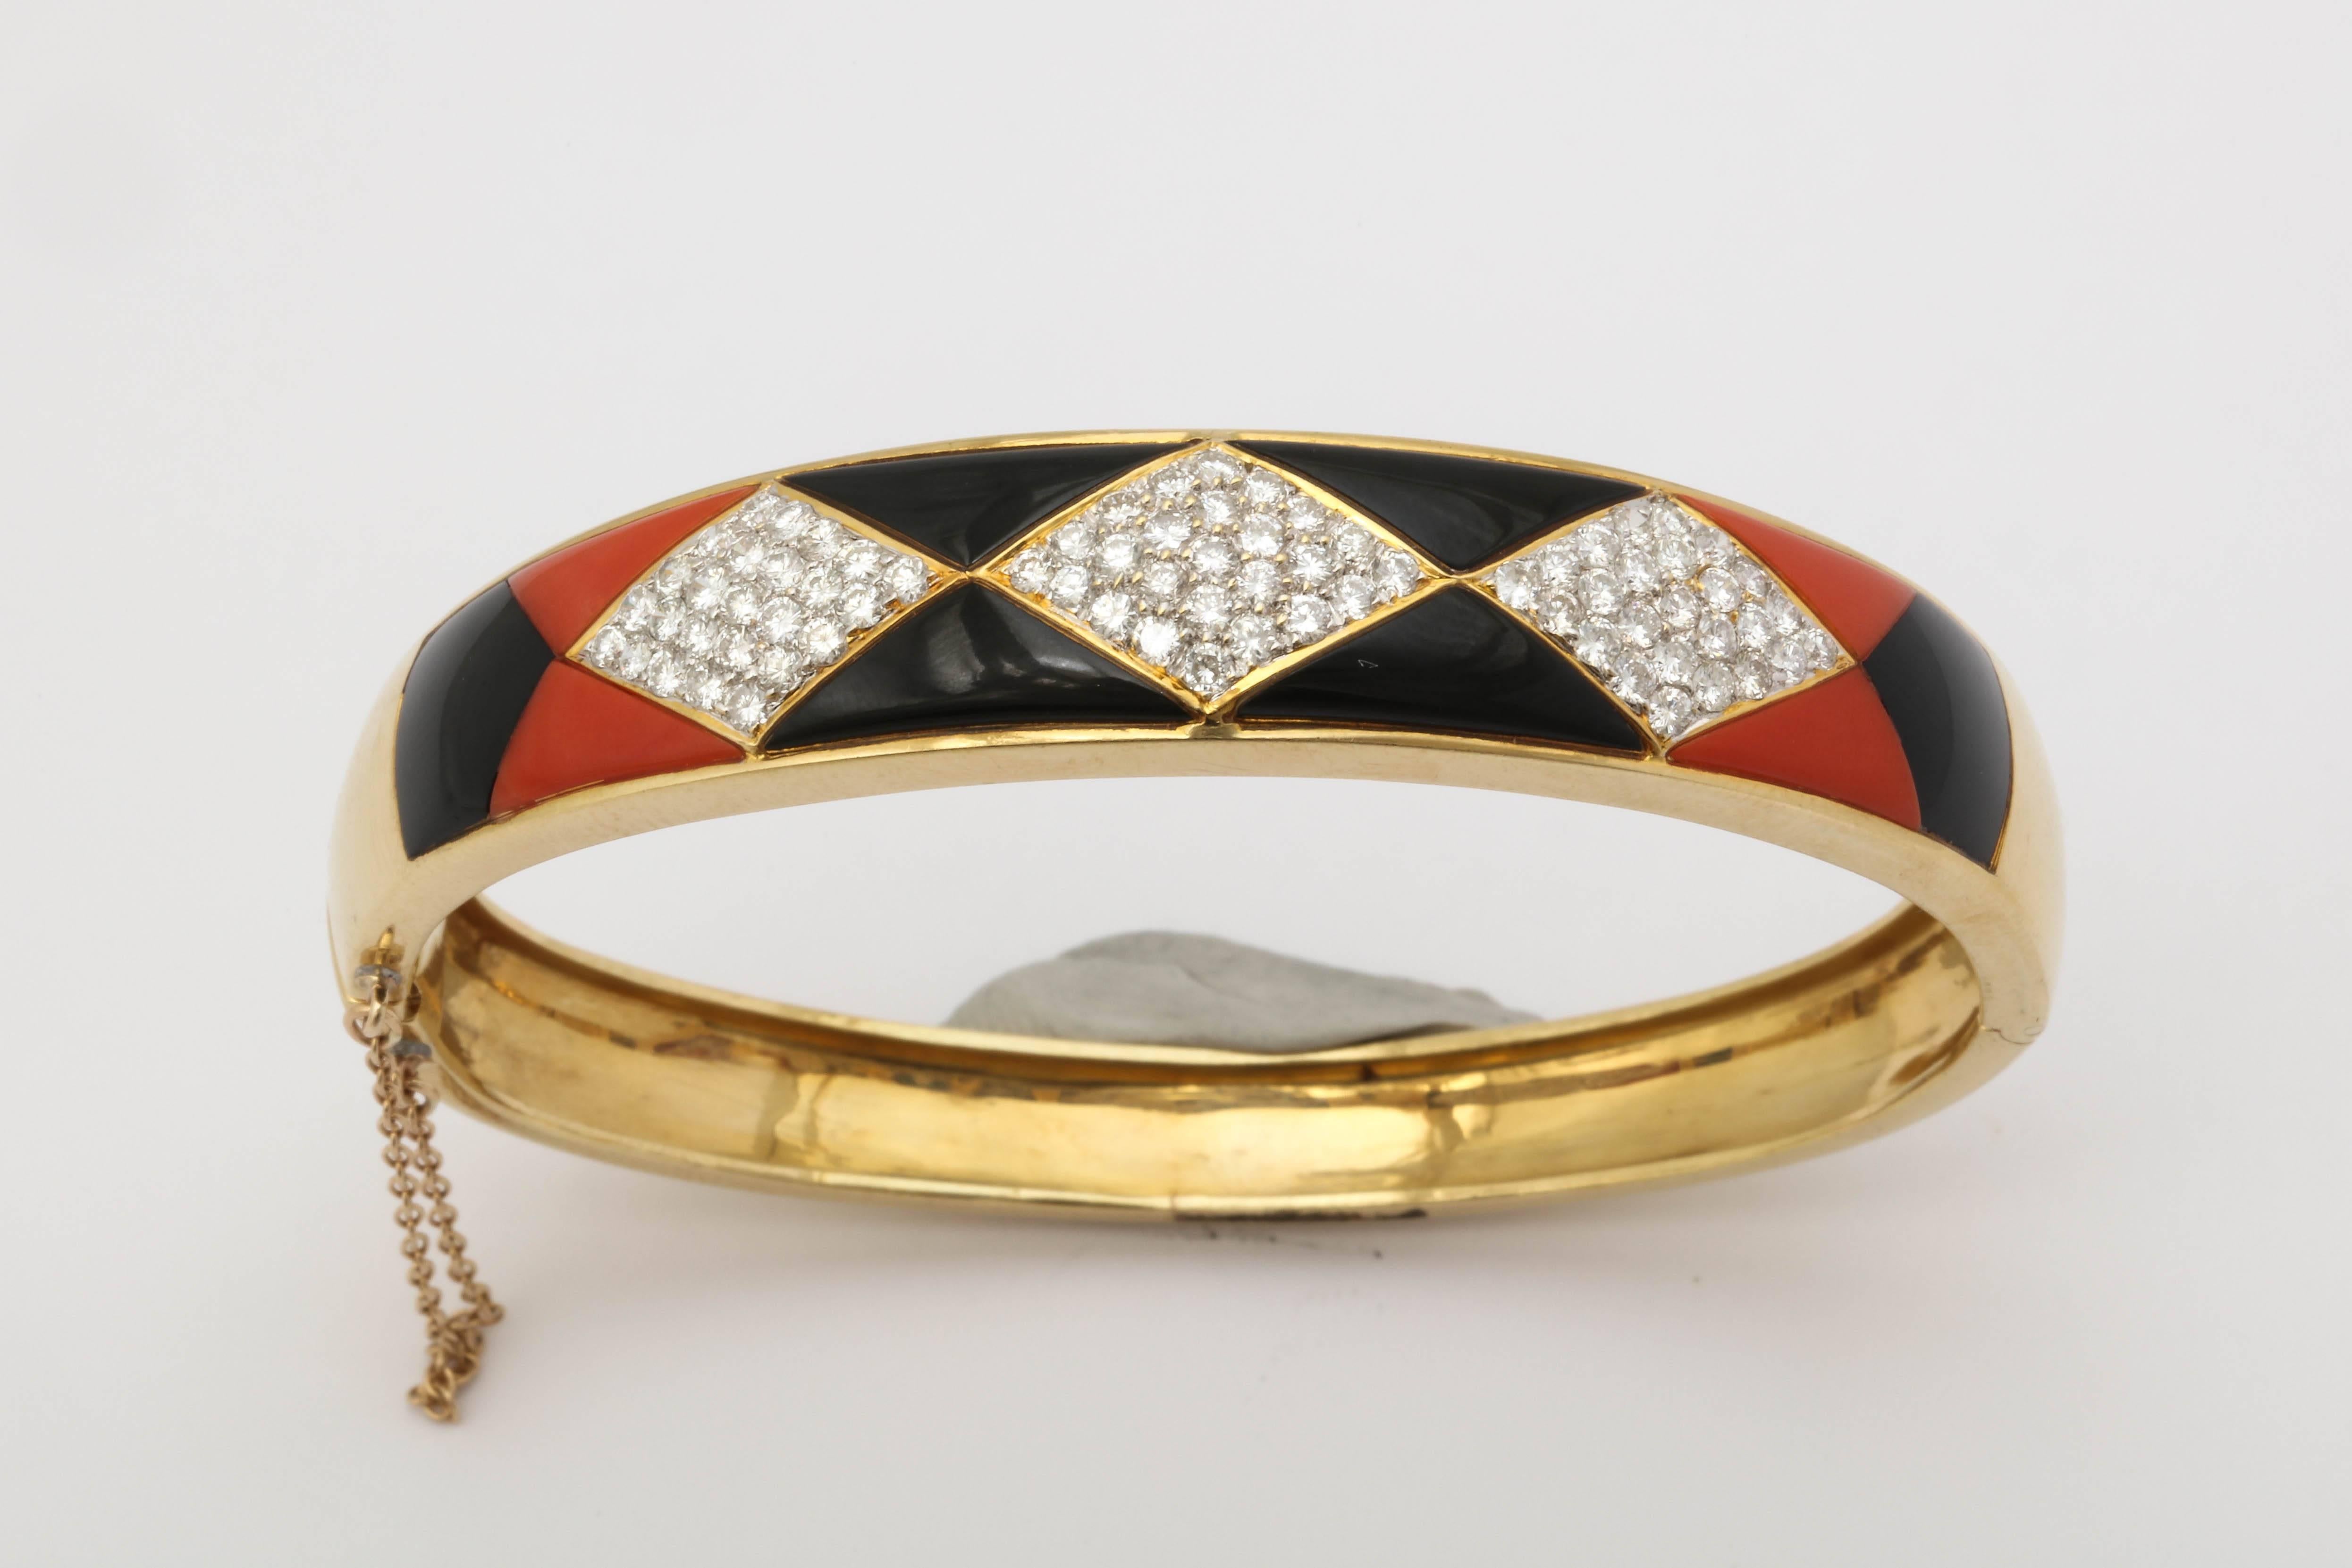 One Ladies Bangle Bracelet Crafted In 18kt Yellow Gold Designed With Alternating Custom Cut Onyx And Coral Asymmetrical Triangular Cut Panels. Further Embellished With Three Horizonal Marquise Panels Encrusted With Approximately 3.75 Cts Of High